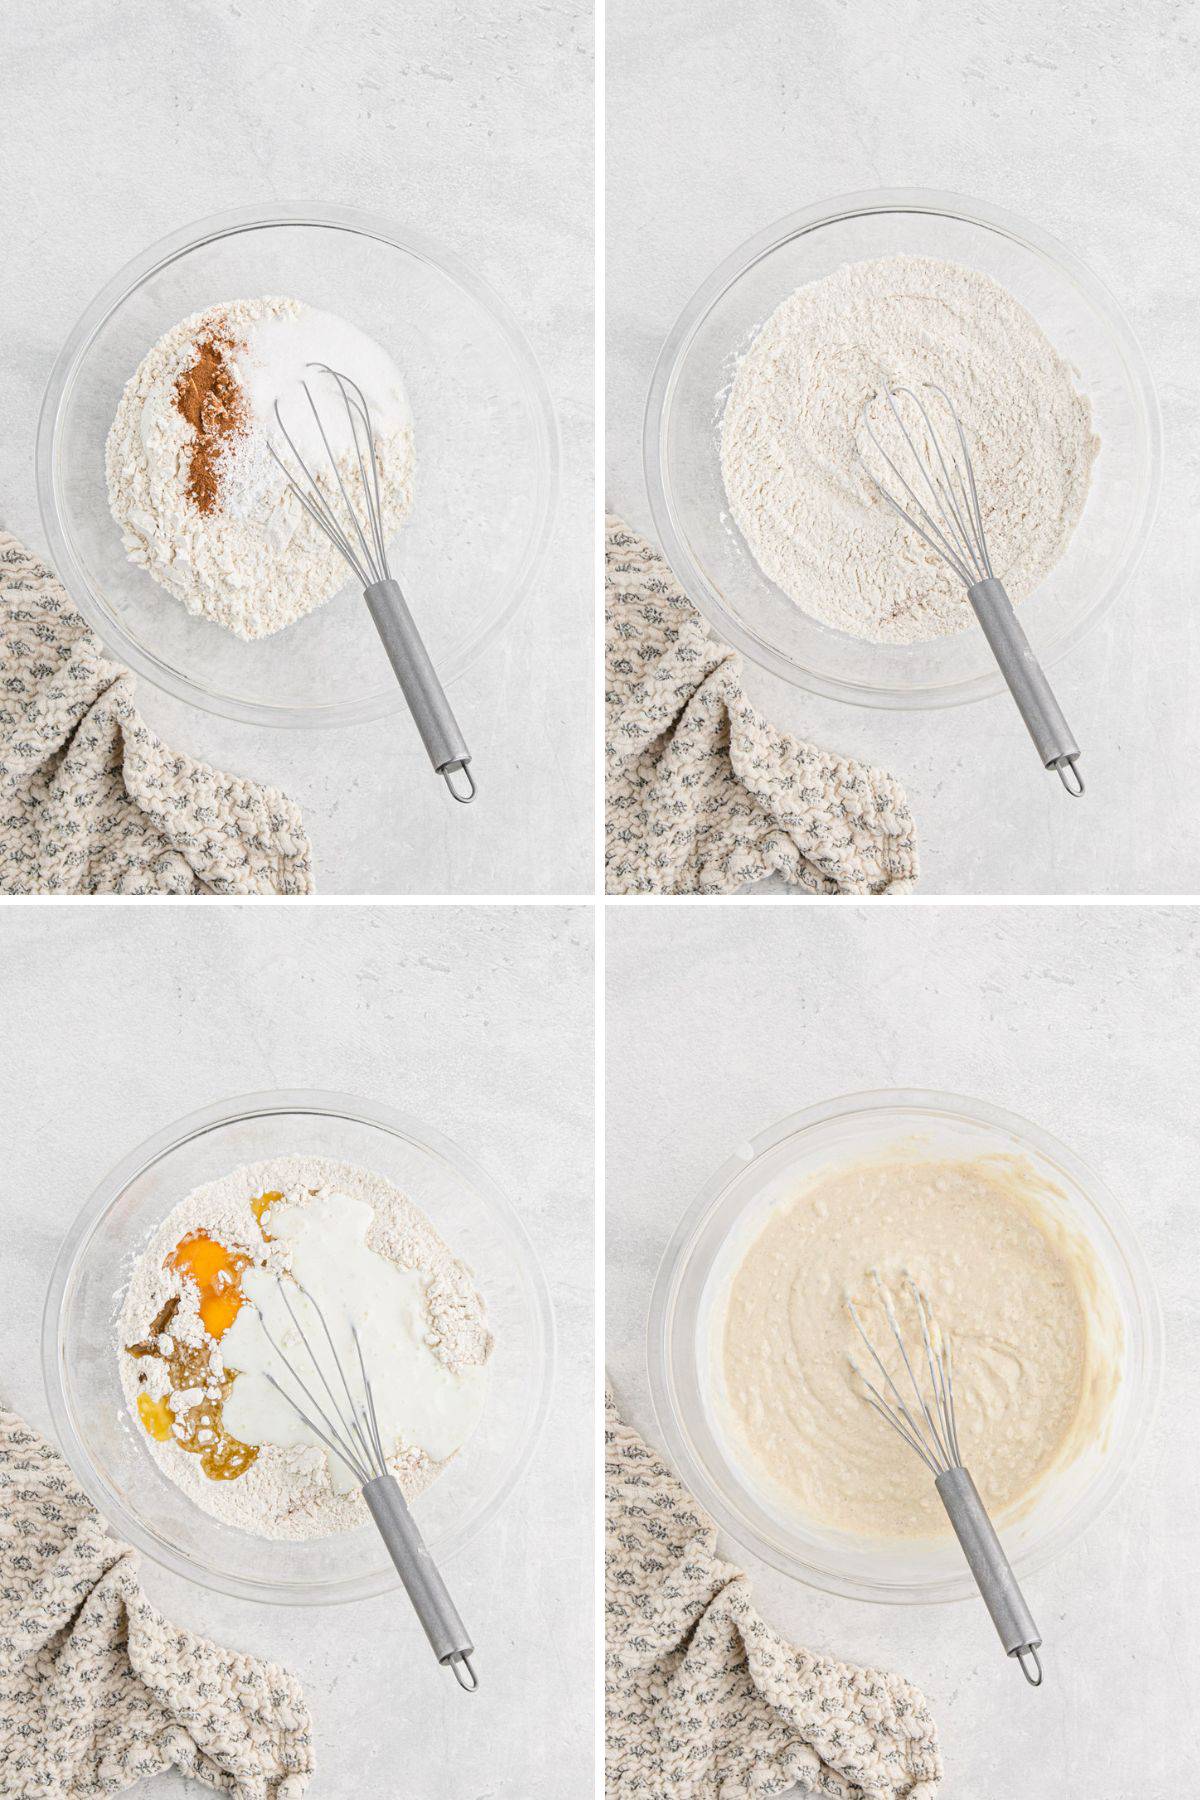 A collage of images showing mixing the waffle batter from mixing the dry ingredients, wet ingredients and finally mixing them together.